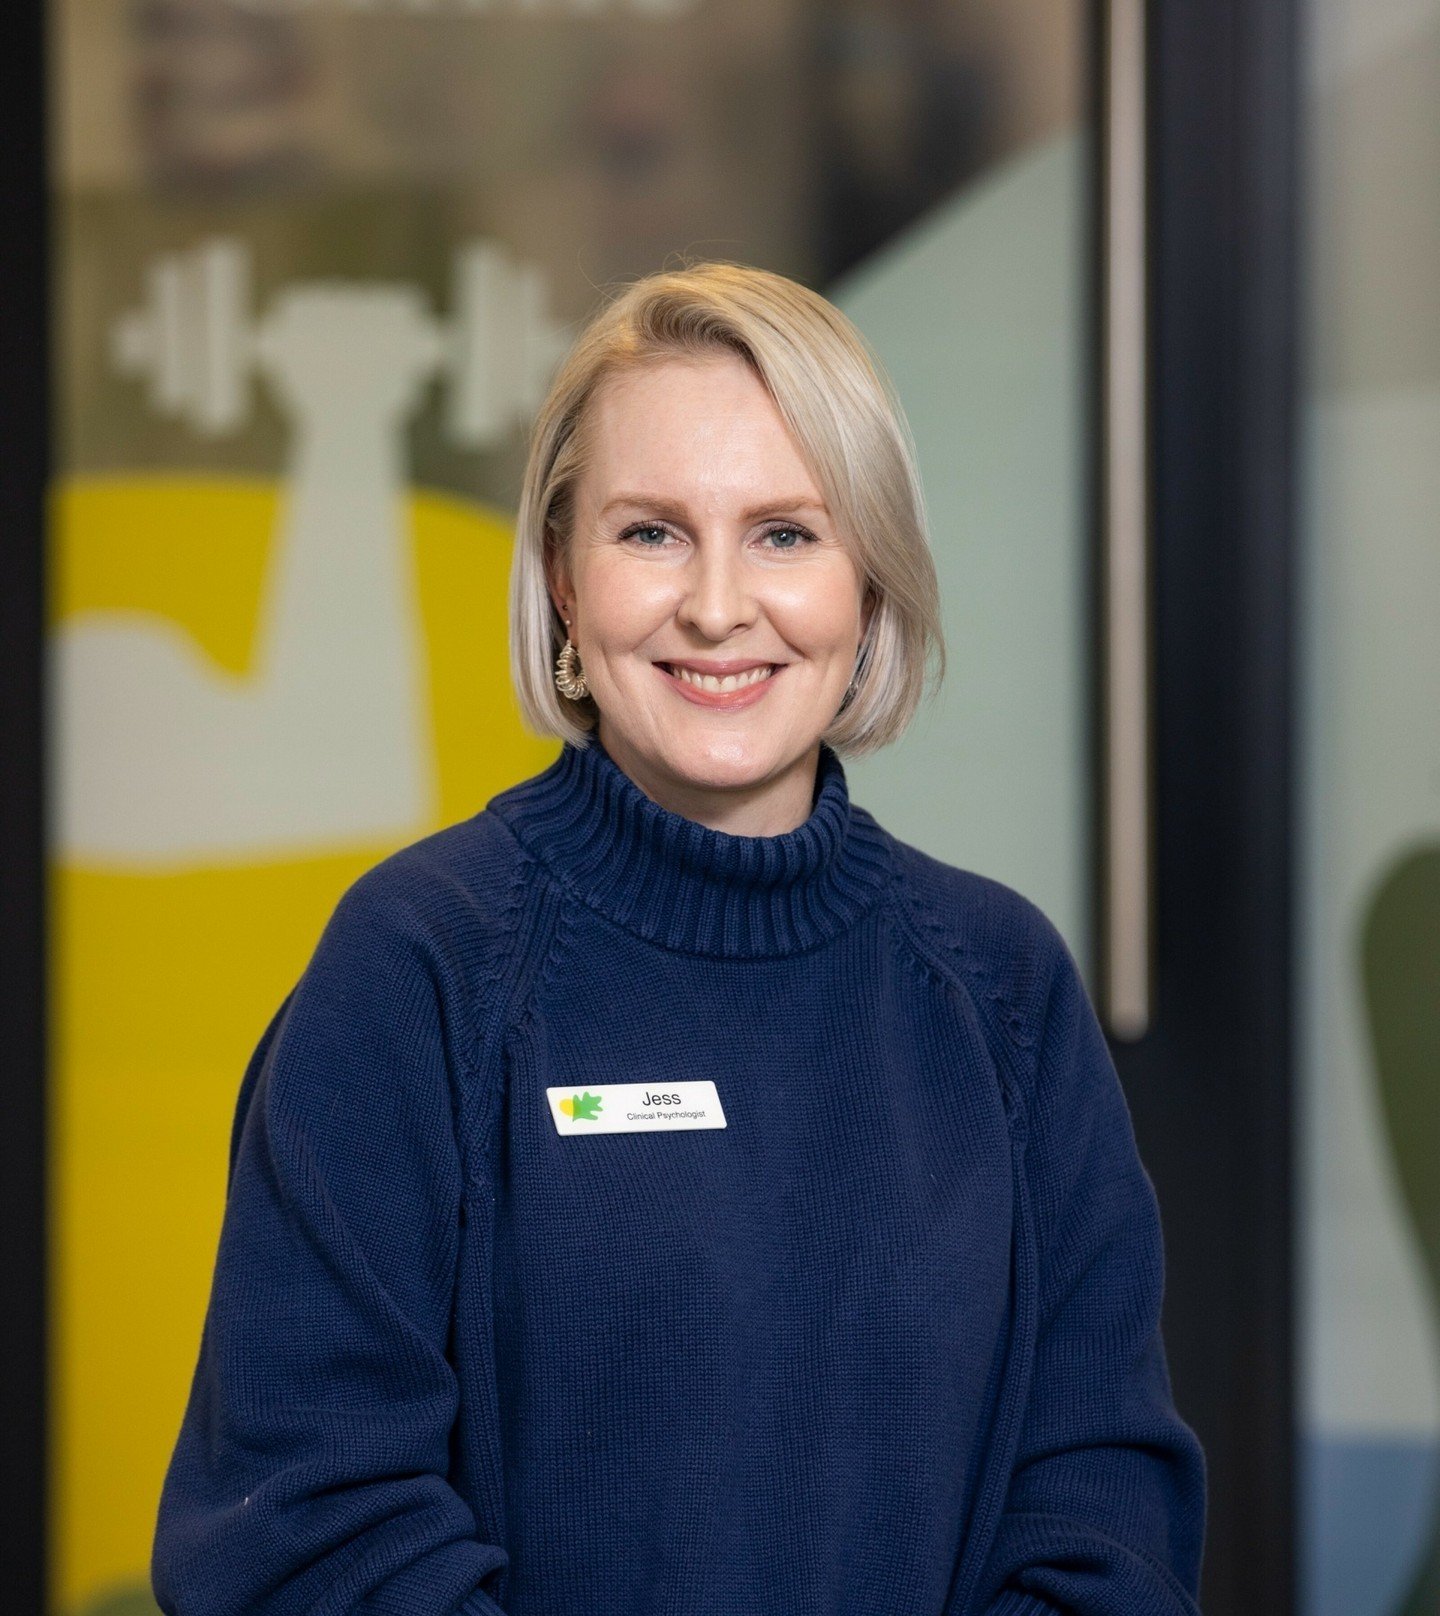 Meet Jess Hondow, Psychology Team Leader at Lift Cancer Care Services!

Jess is a Clinical Psychologist who has more than 15 years experience. She has spent the last 10 years working in health, rehabilitation and cancer in both public and private set